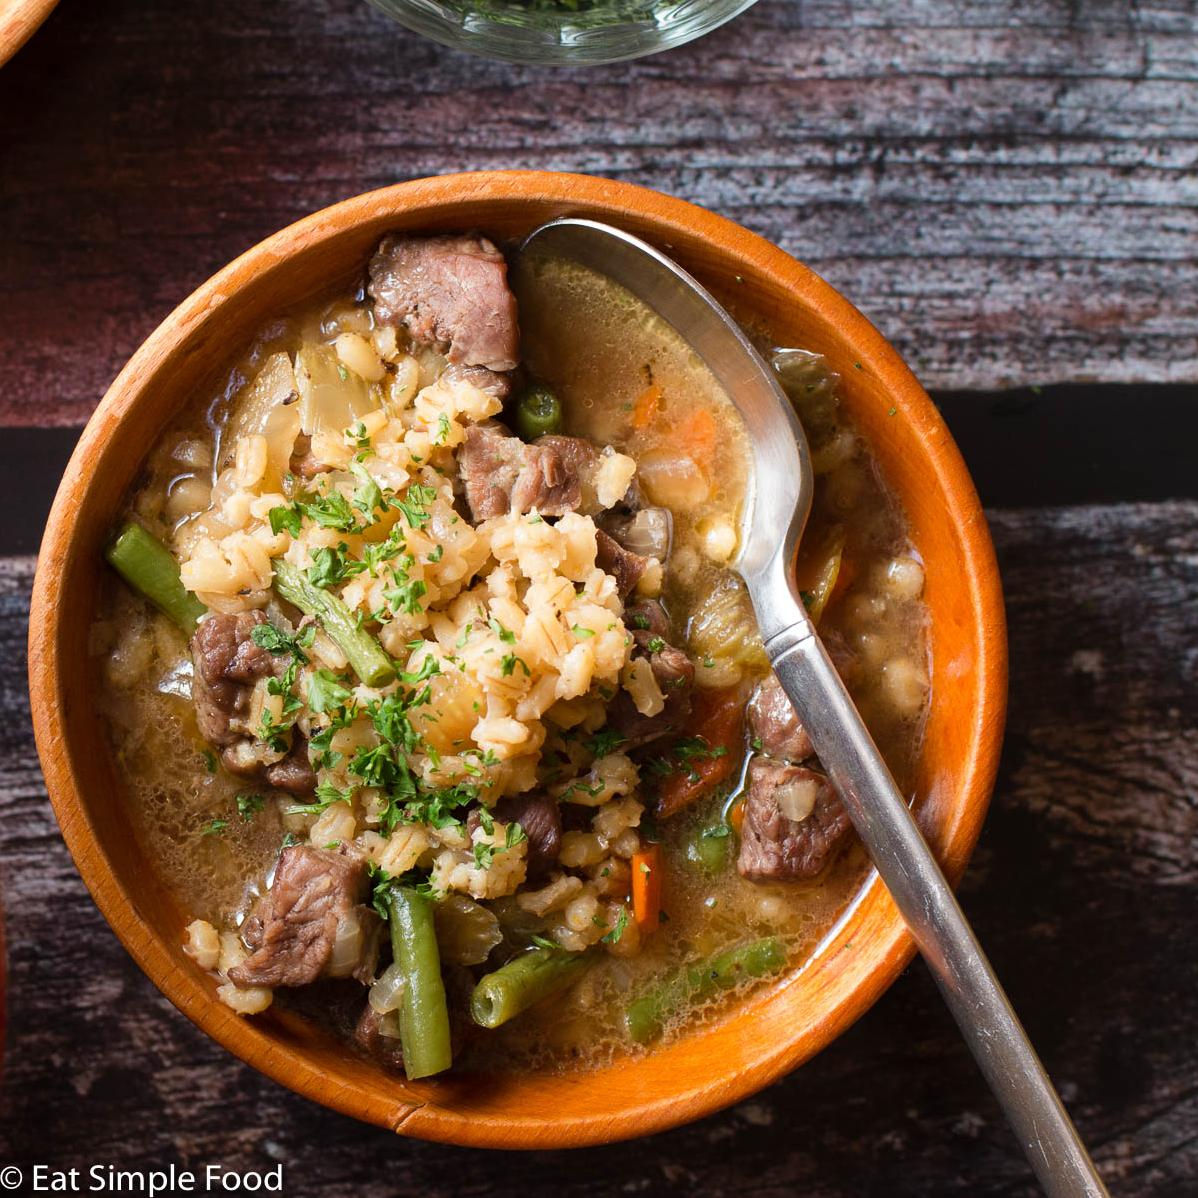 Try our hearty Irish lamb and barley soup